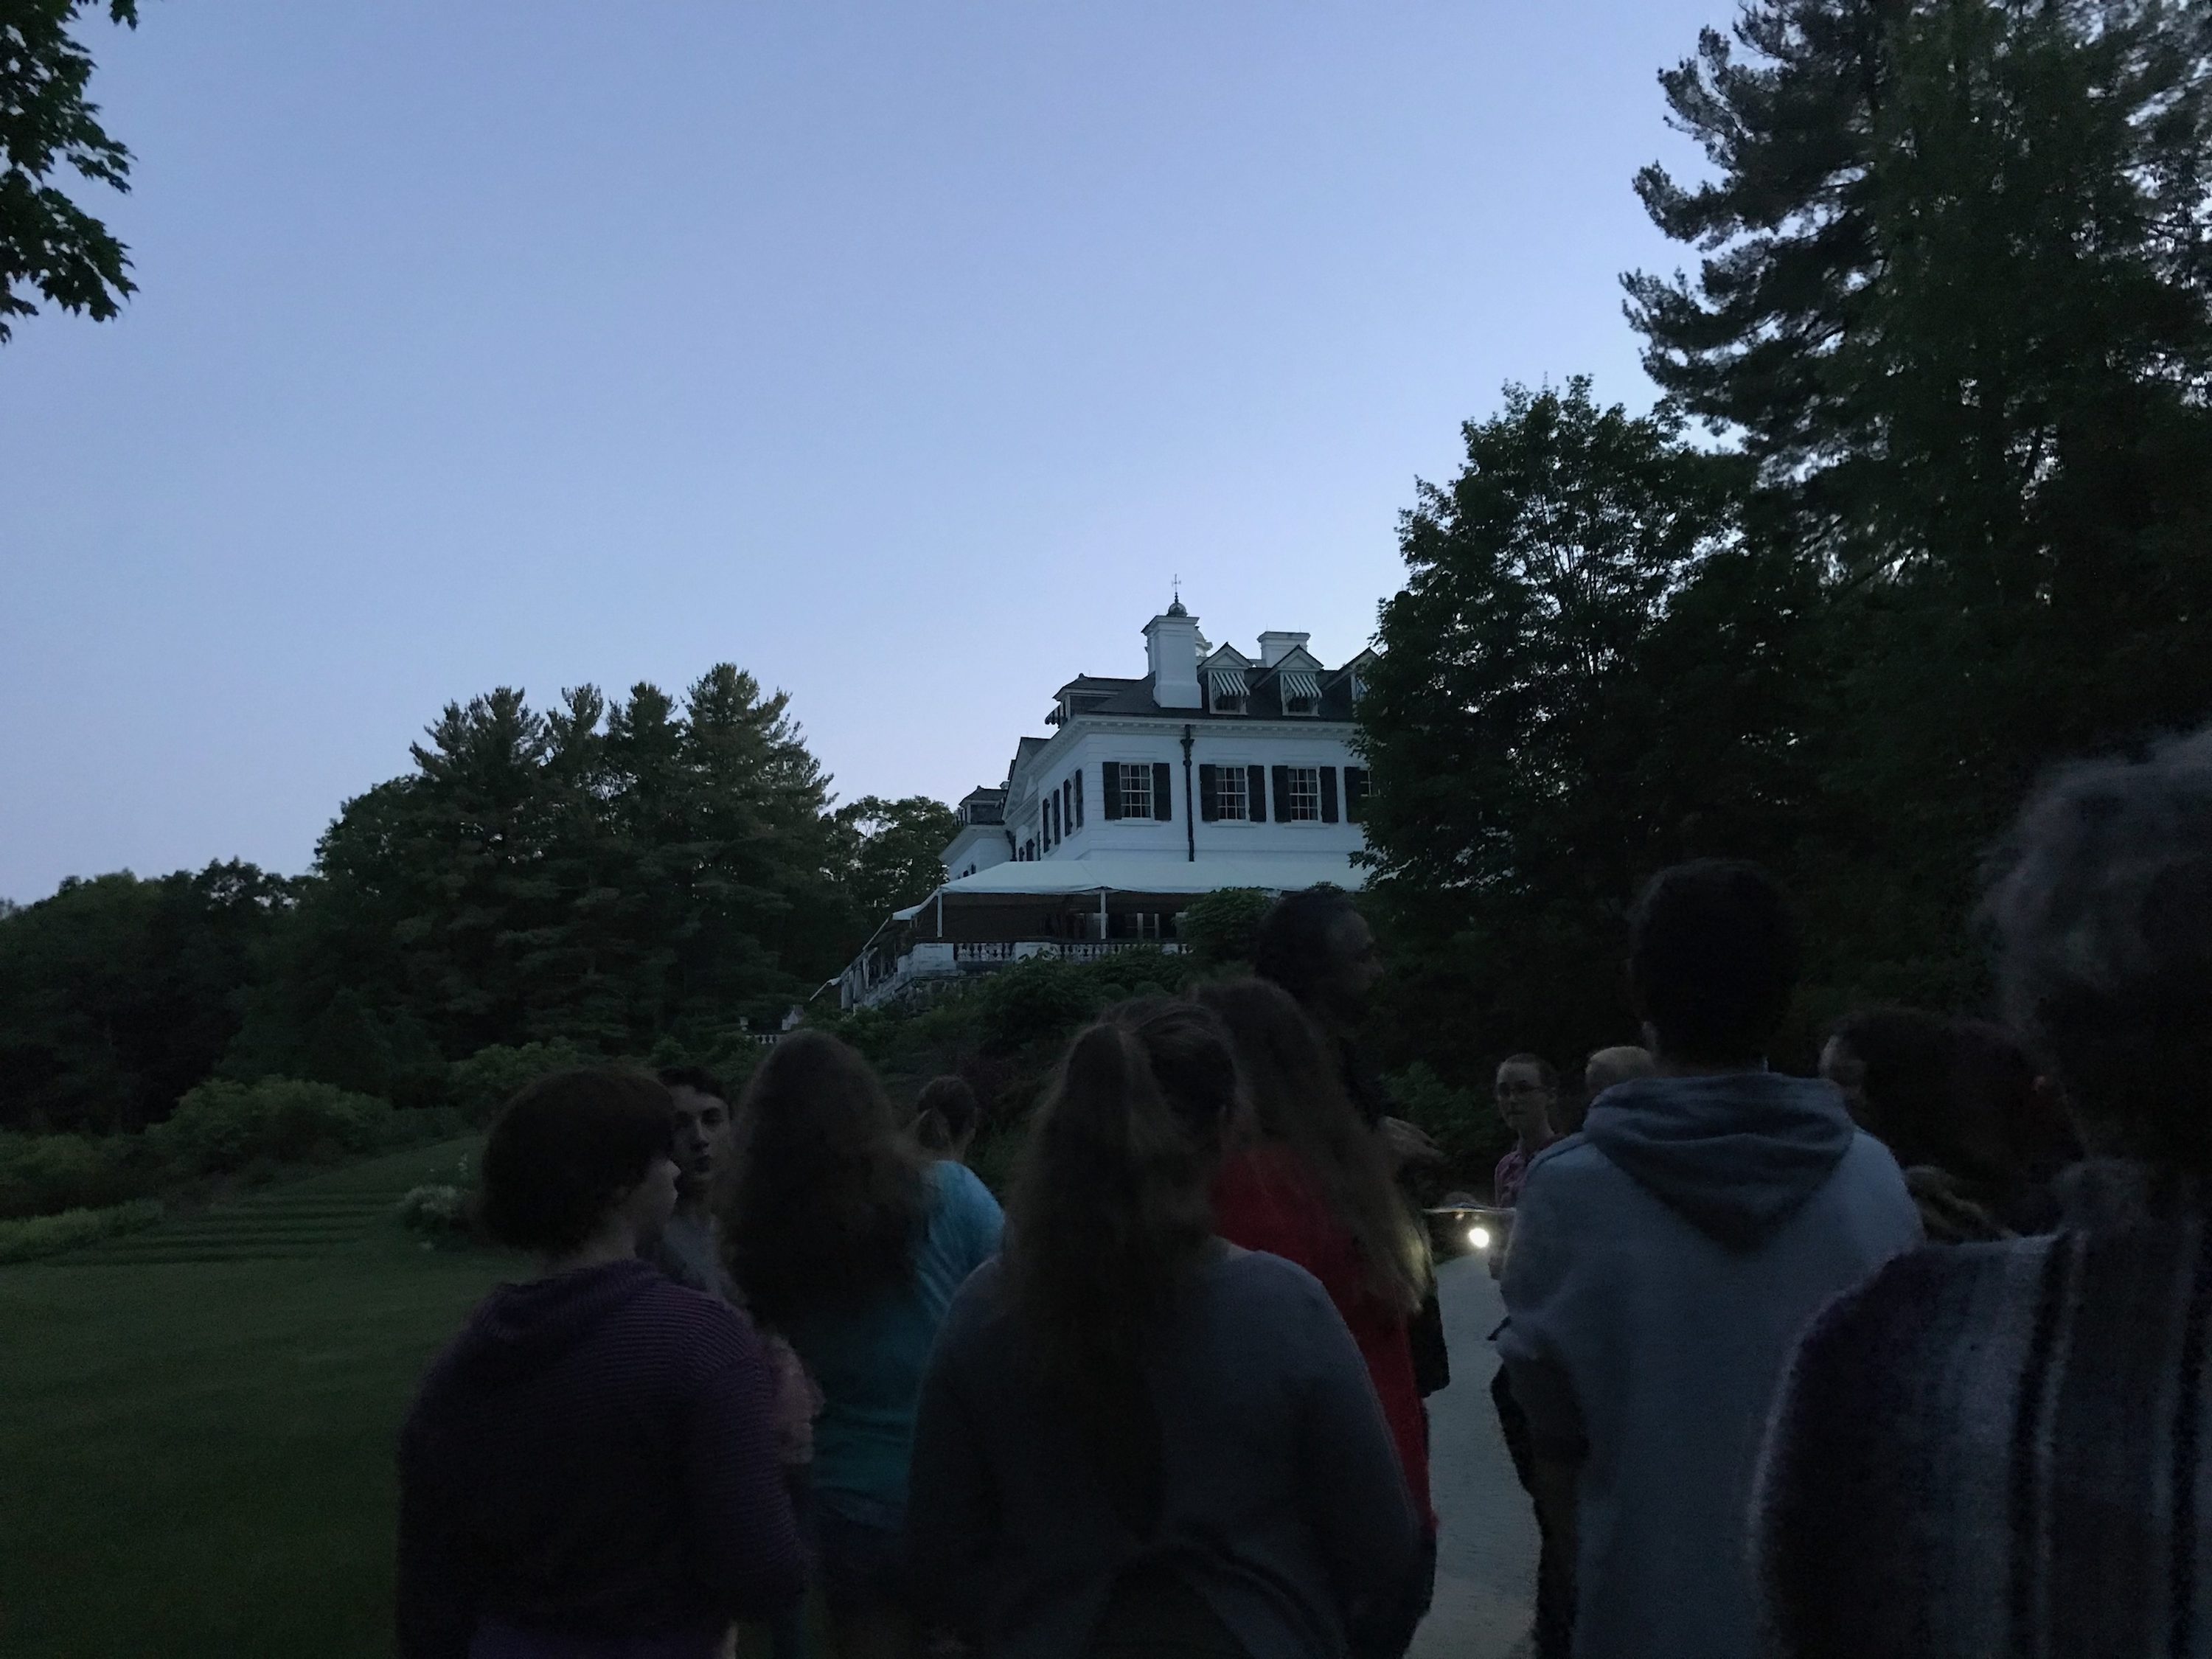 Guests gathered around a tour guide at sunset.